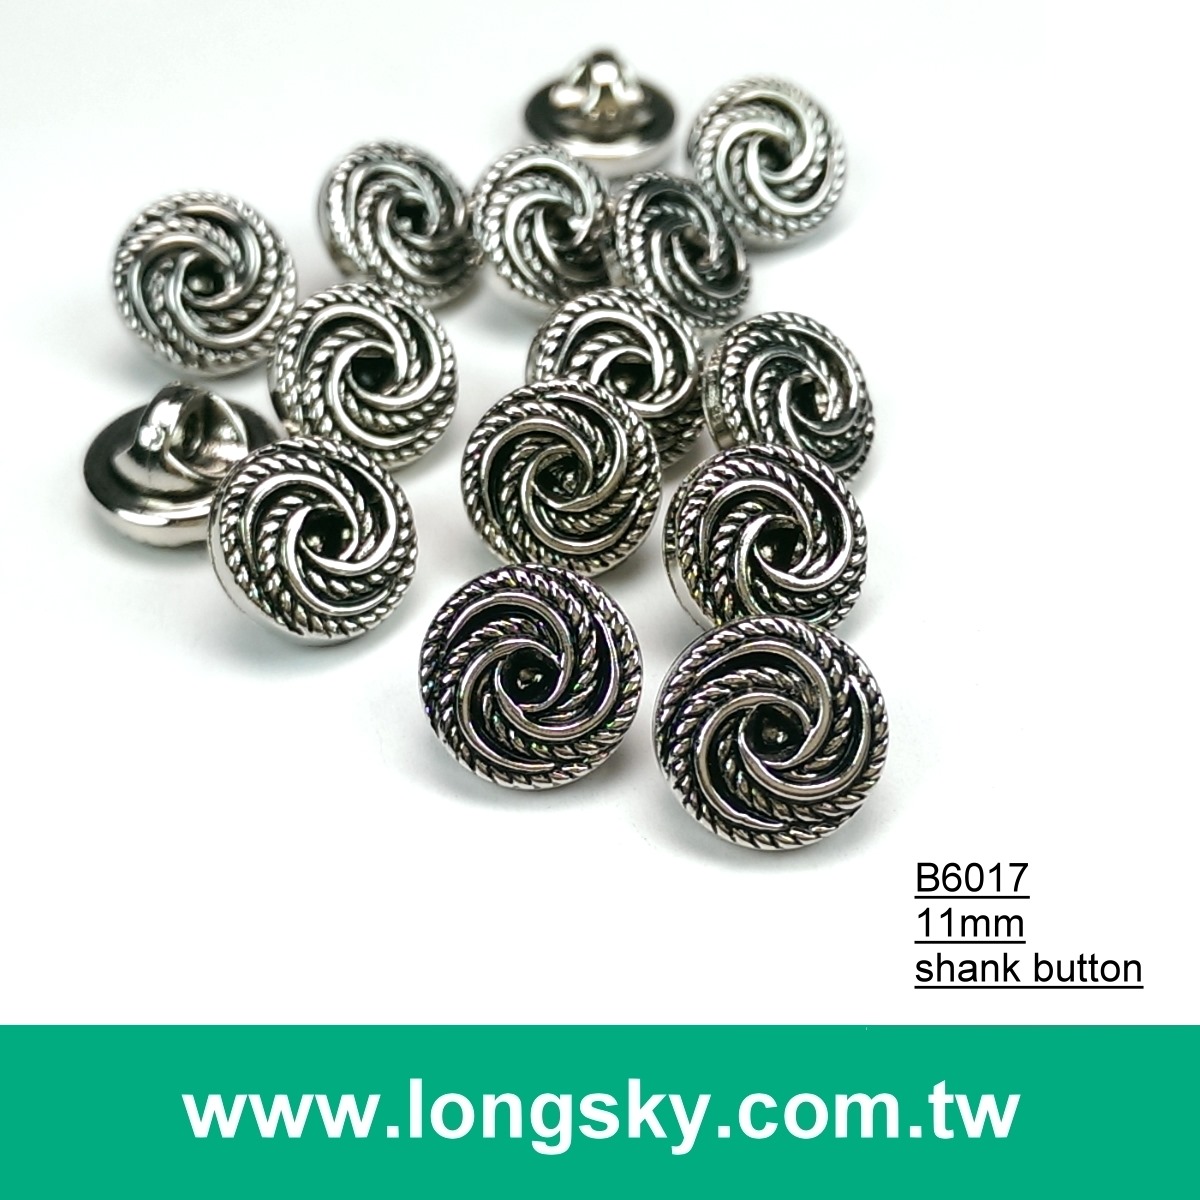 (#B6017/11mm) 17L Taiwan fancy anthentic plated swirl pattern small shirt buttons with shank